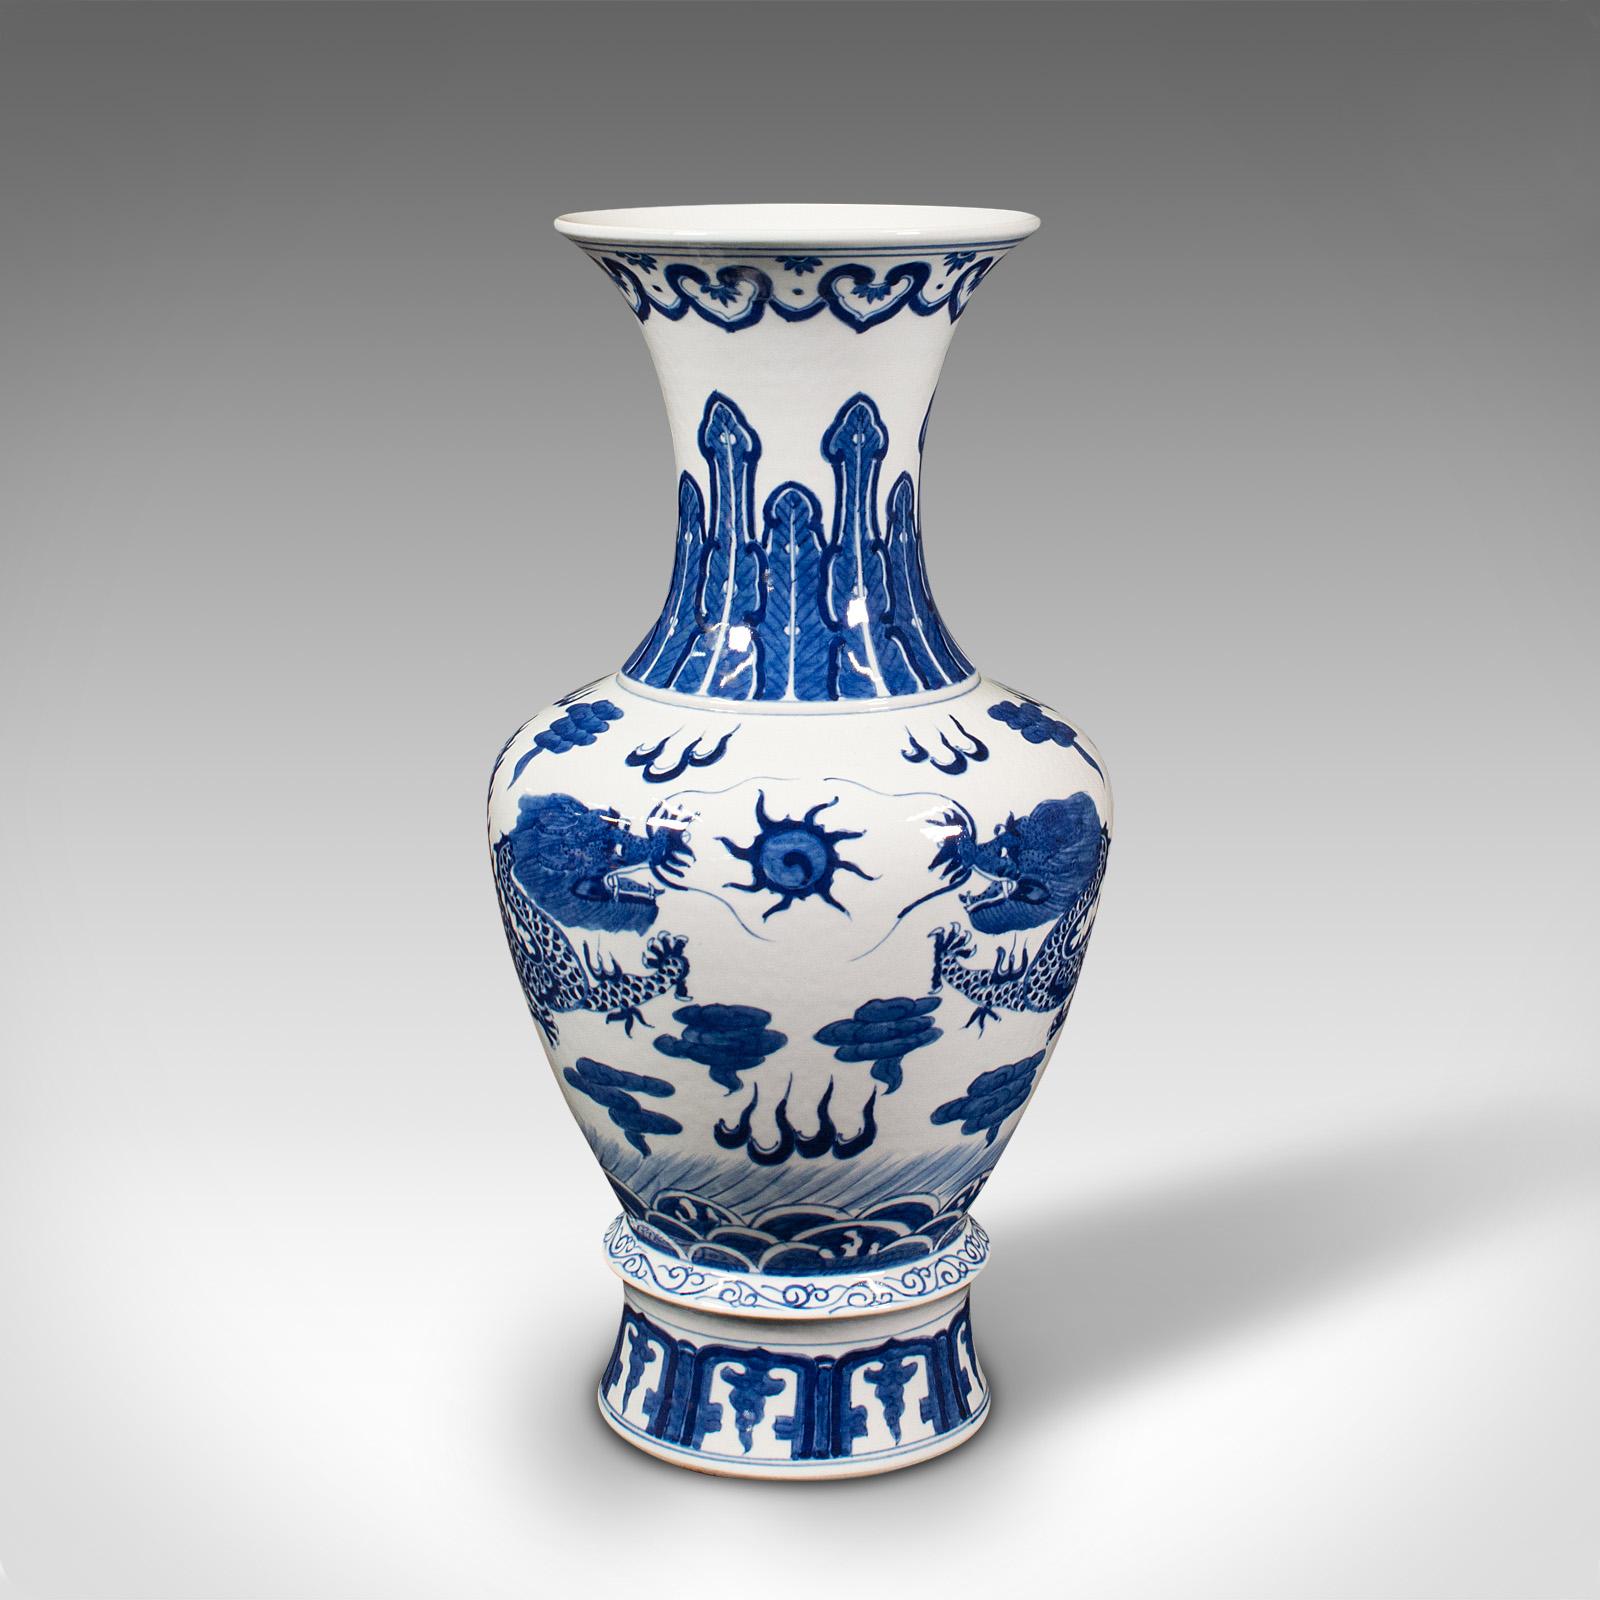 This is a vintage baluster vase. A Chinese, ceramic decorative display vase, dating to the late Art Deco period, circa 1940.

Presents the iconic white and blue finish with Oriental taste
Displays a desirable aged patina, free of marks or